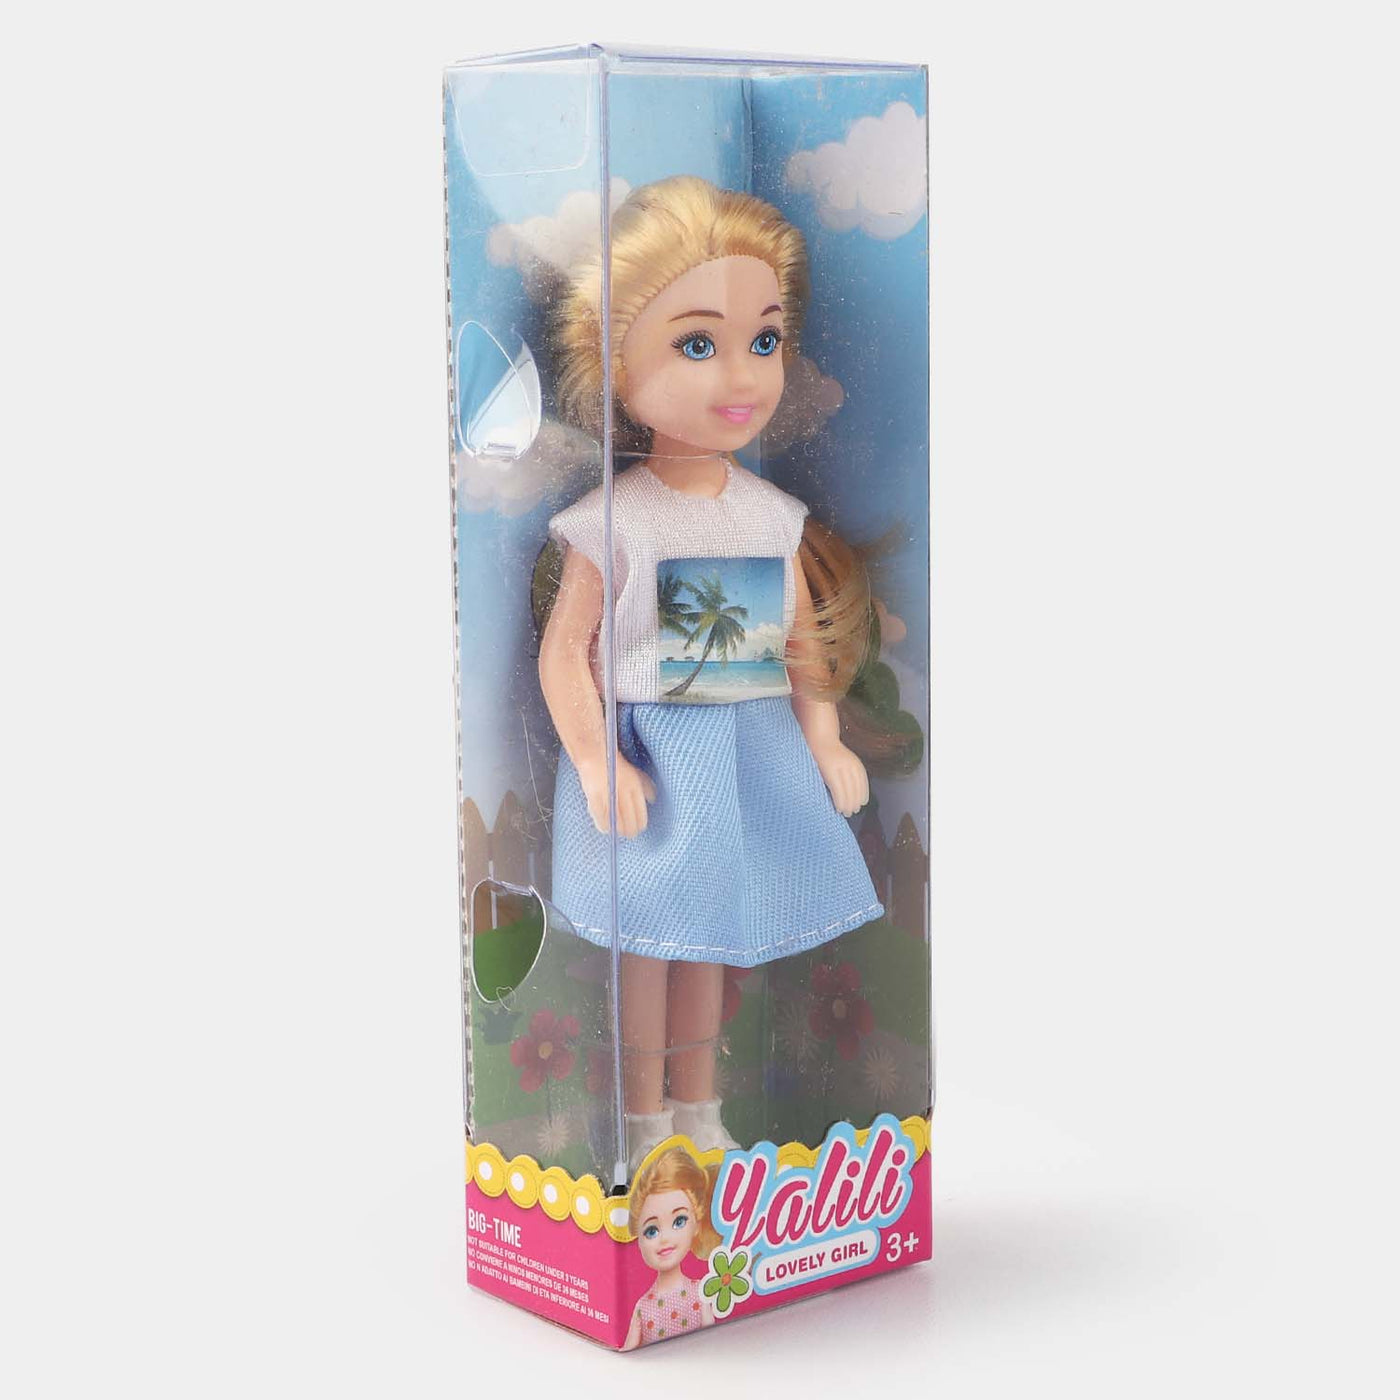 Fashion Doll For Kids